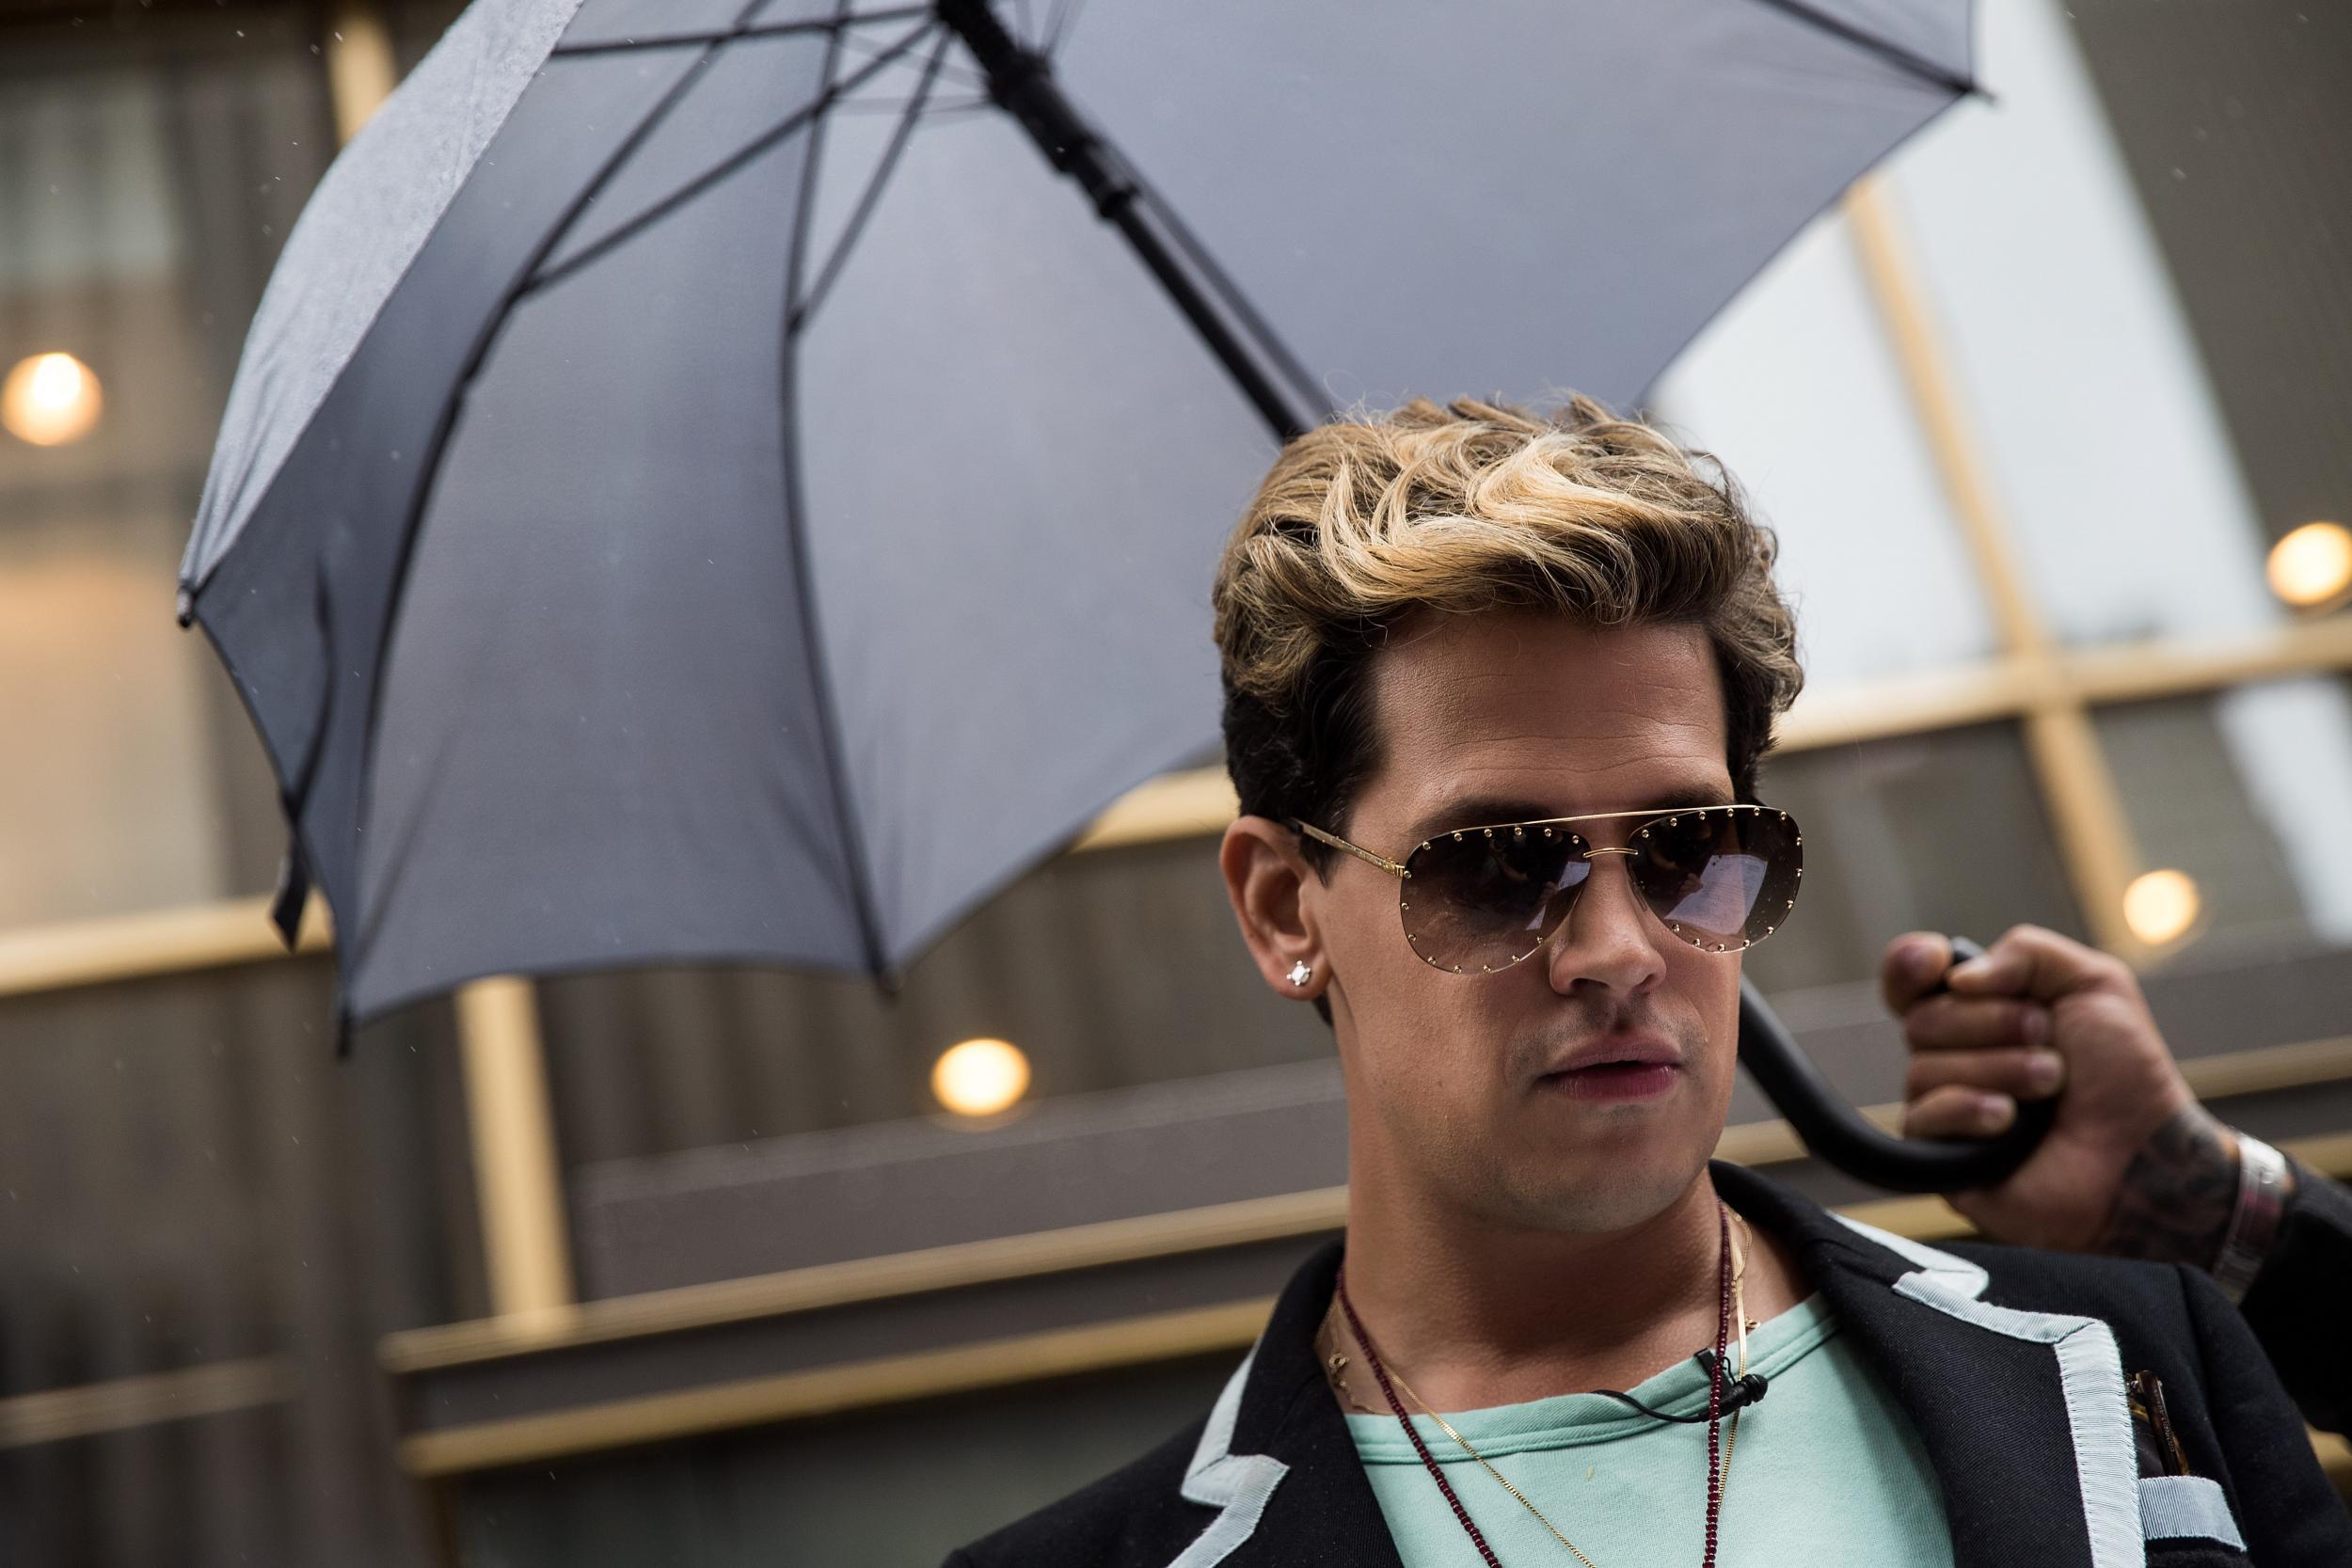 Milo Yiannopoulos pauses while speaking outside the offices of Simon & Schuster publishing company